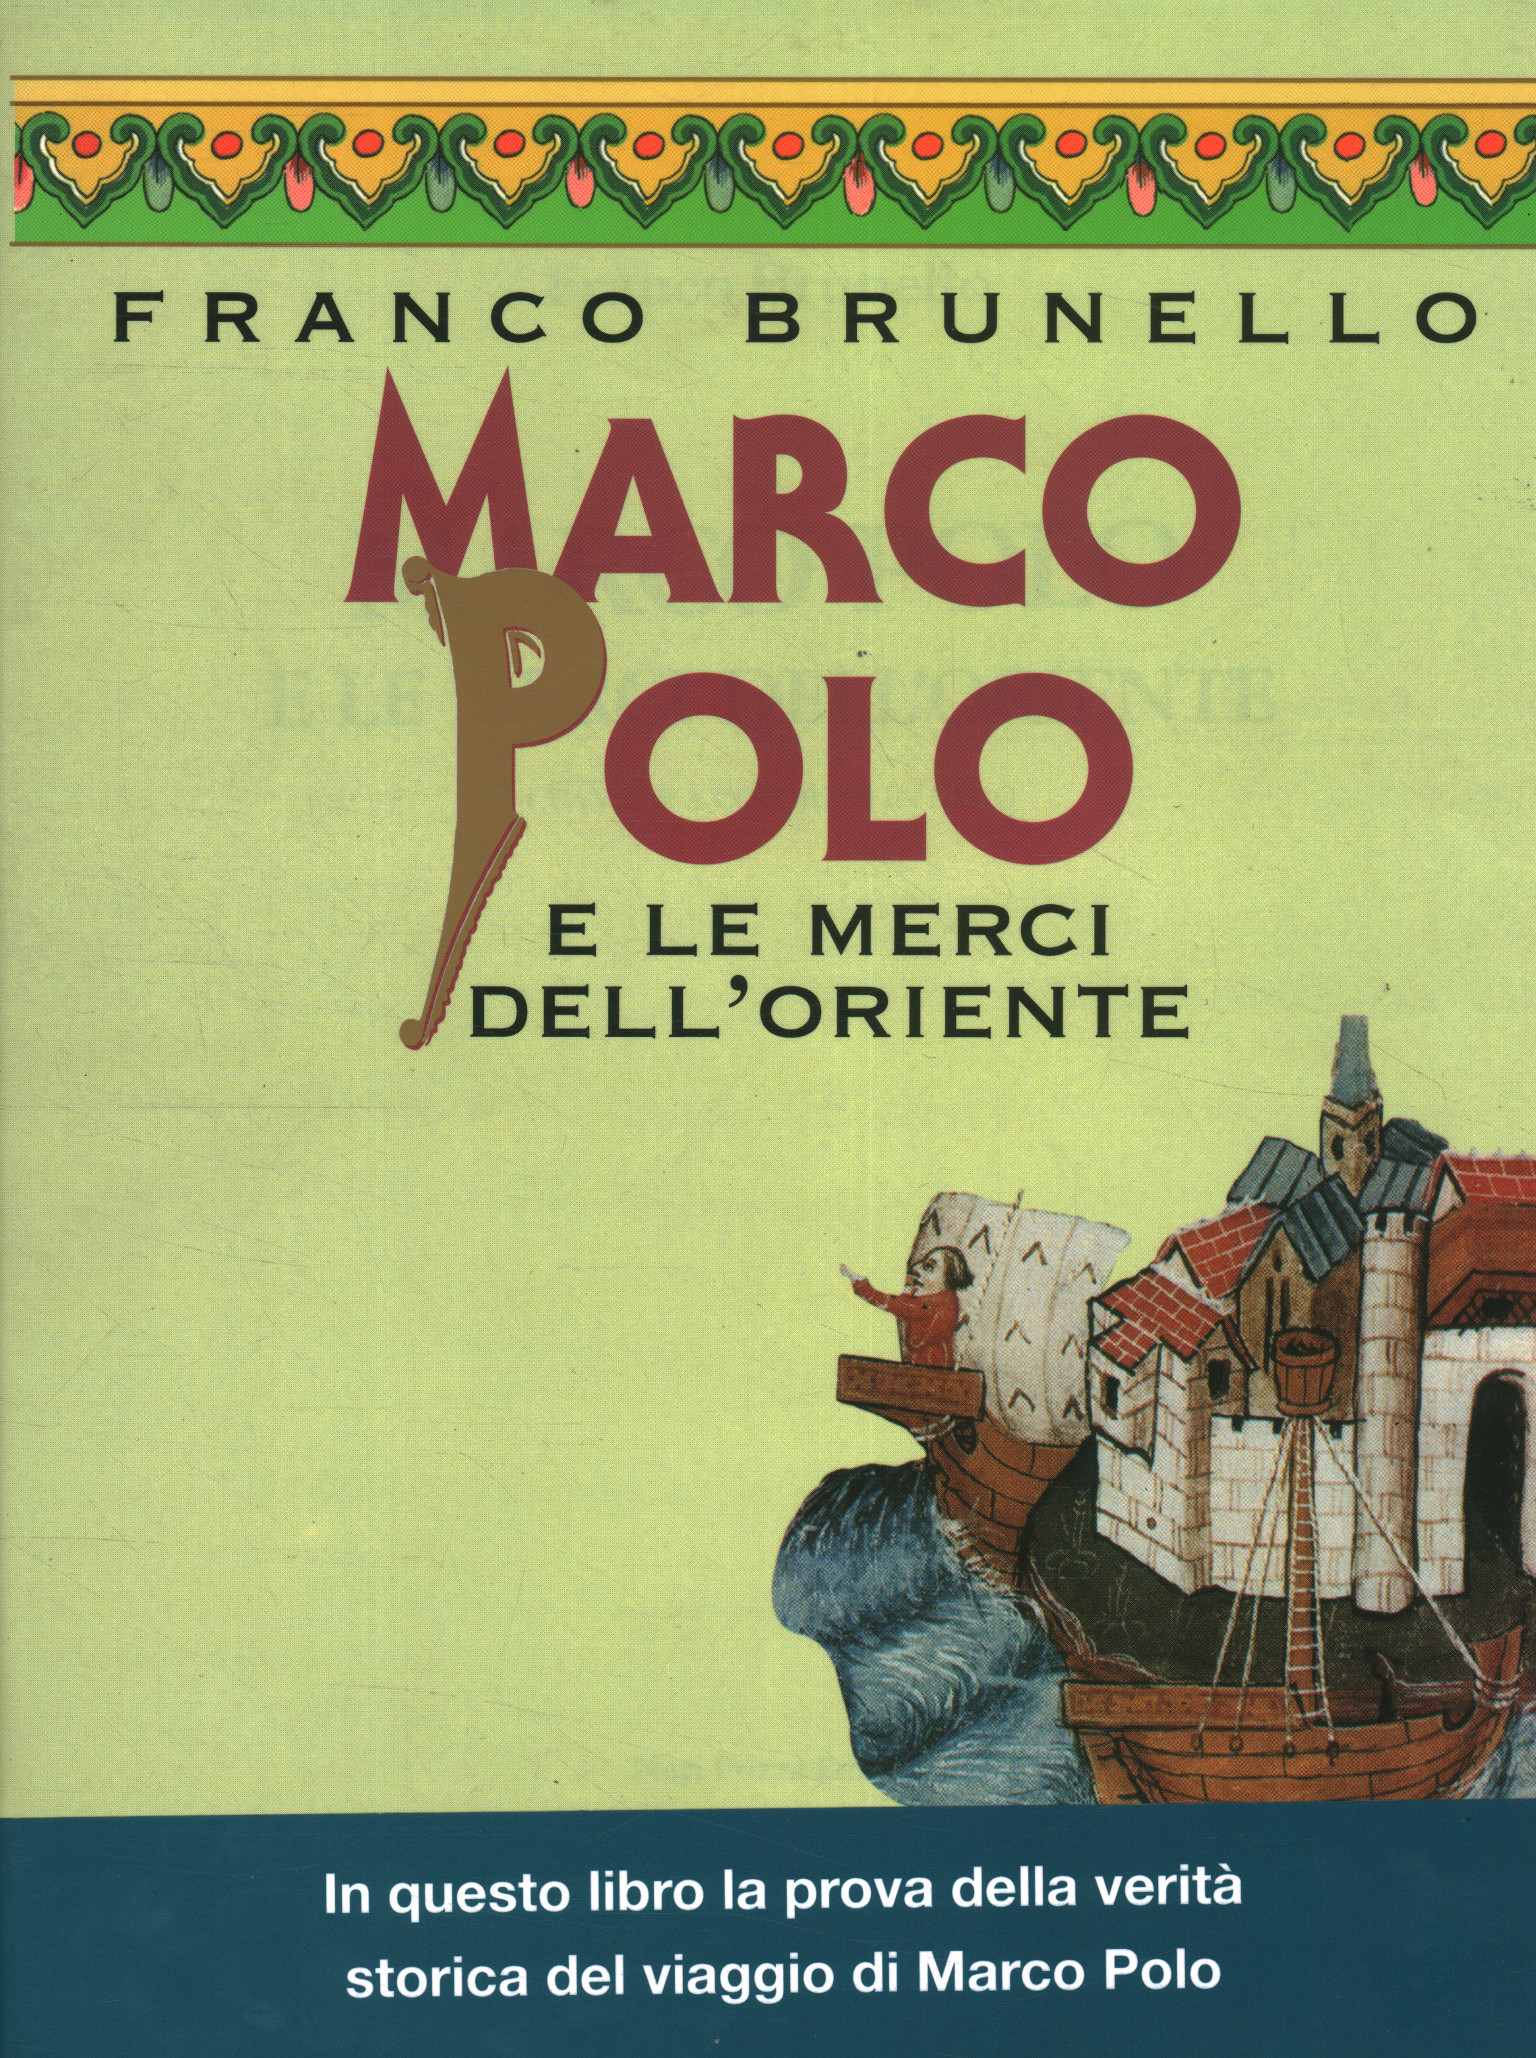 Marco Polo and the goods of the Or